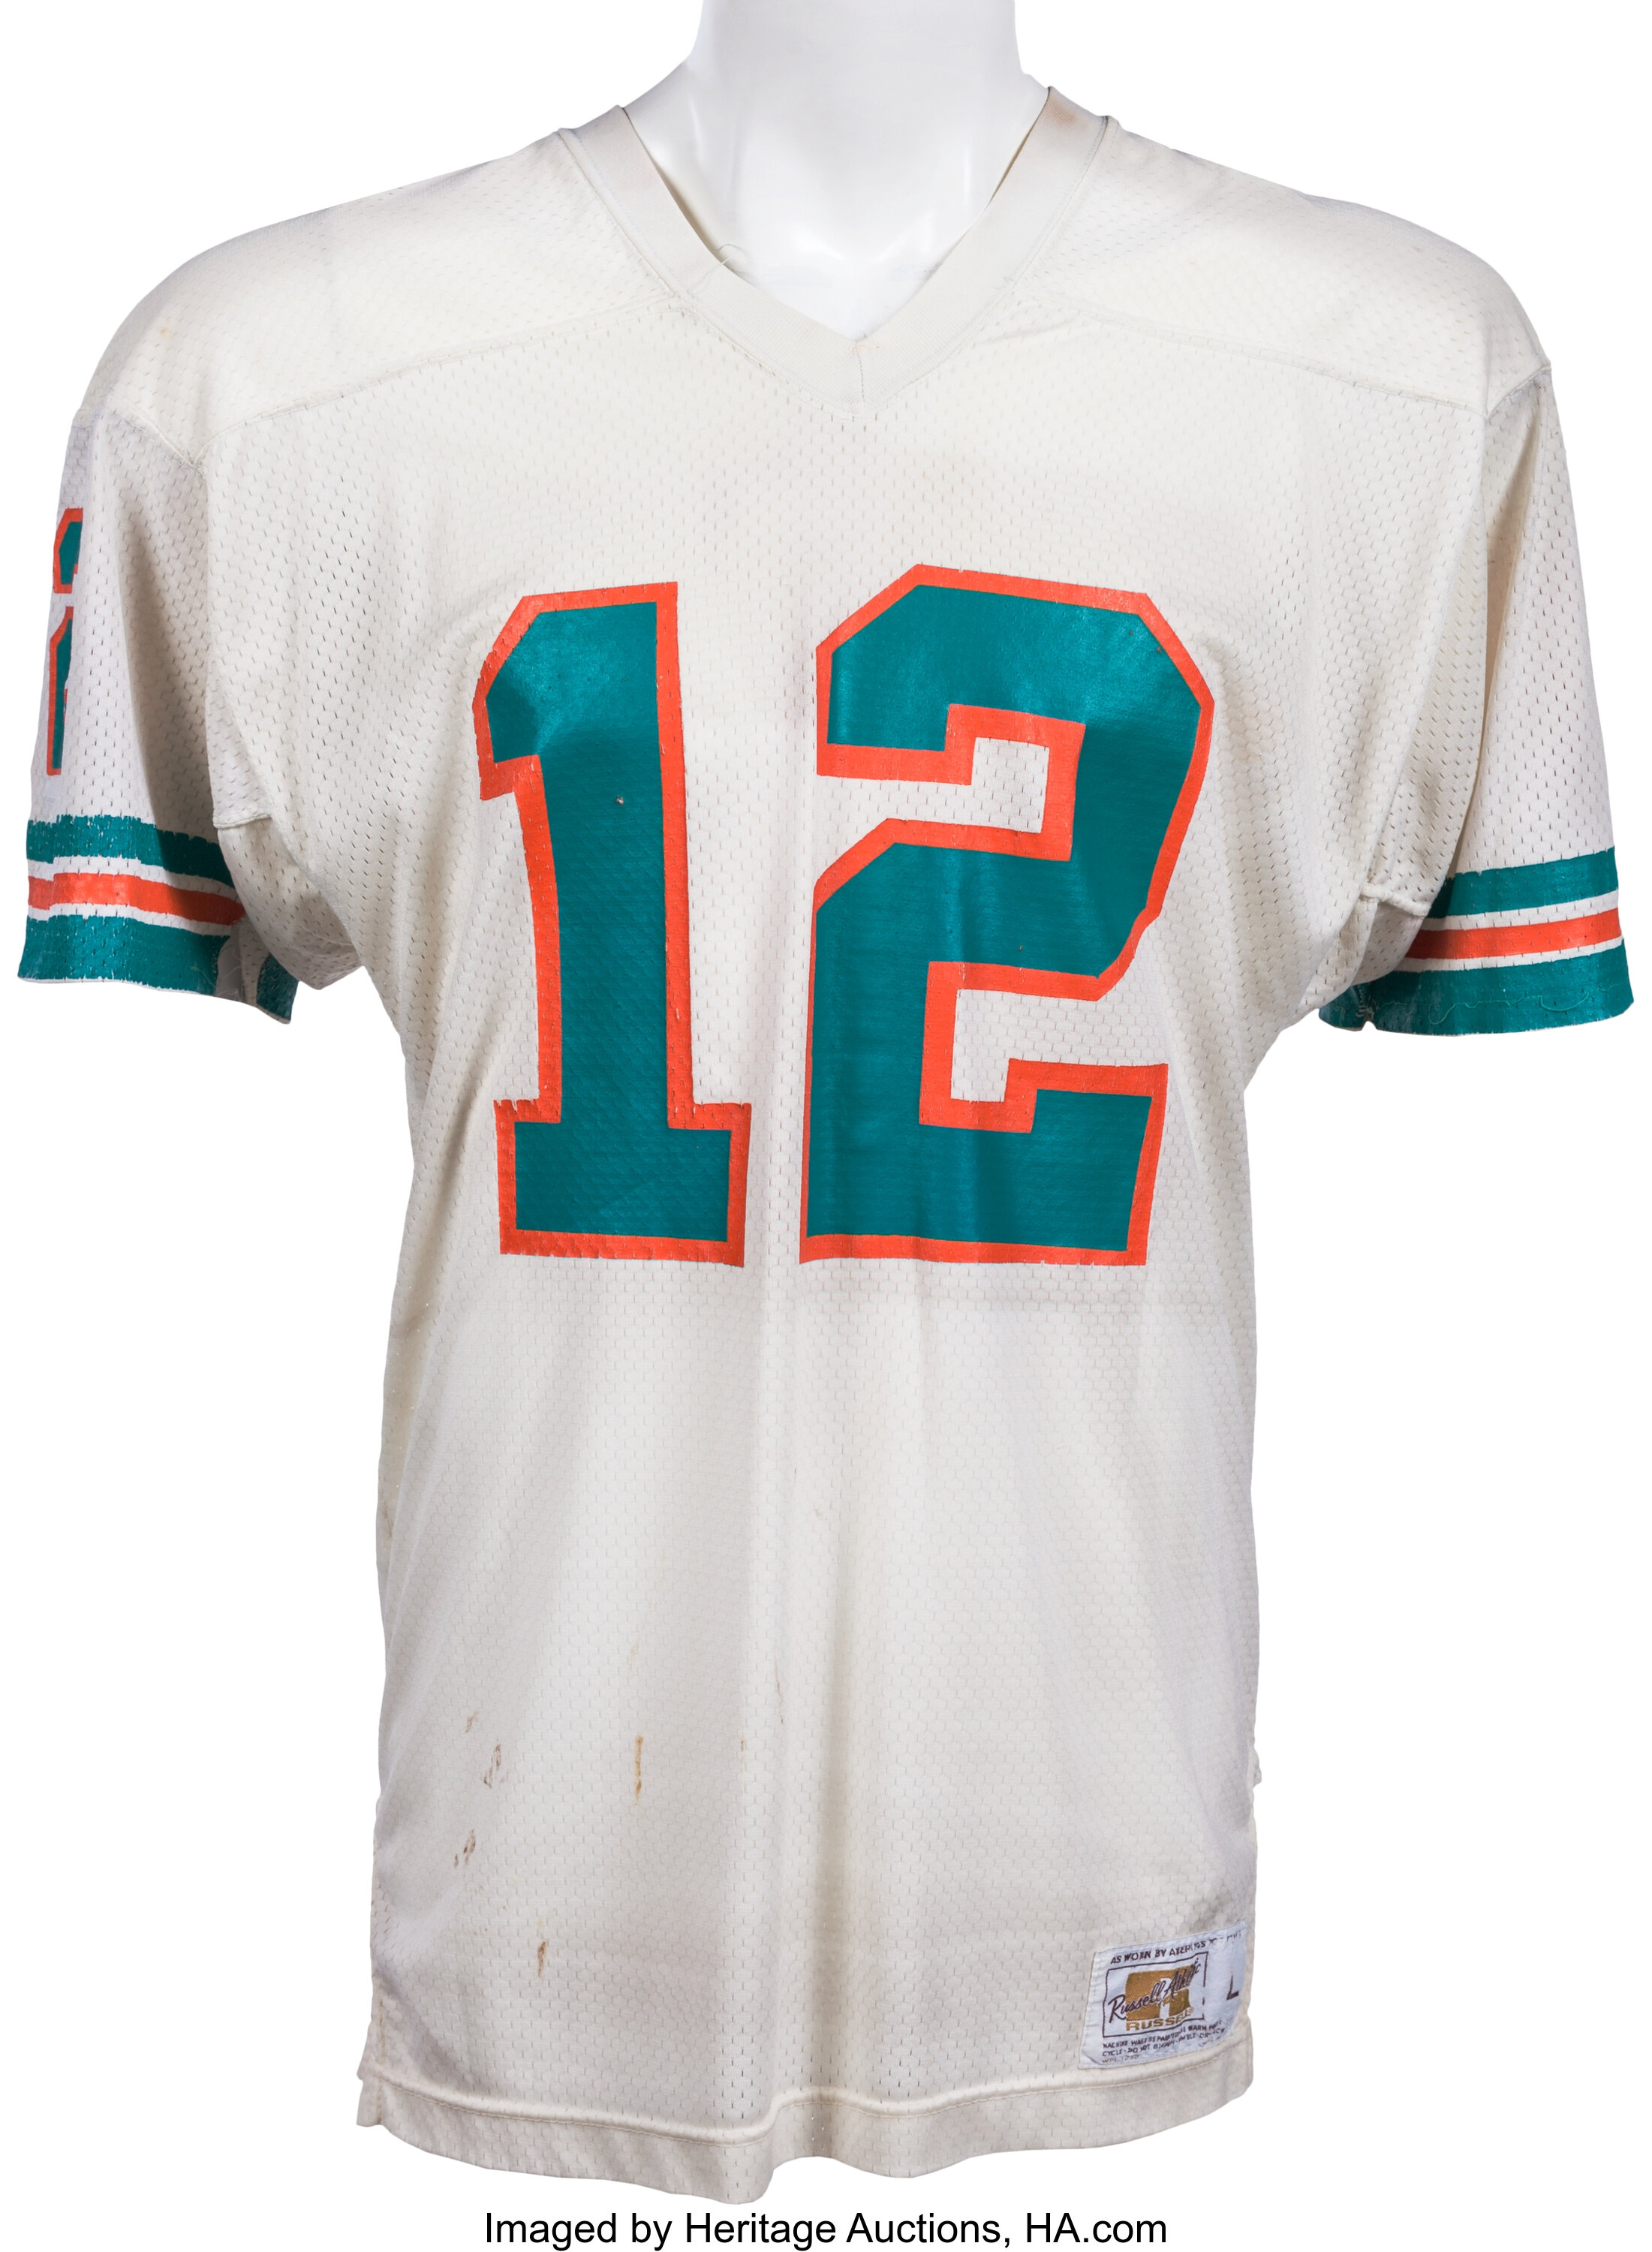 griese jersey